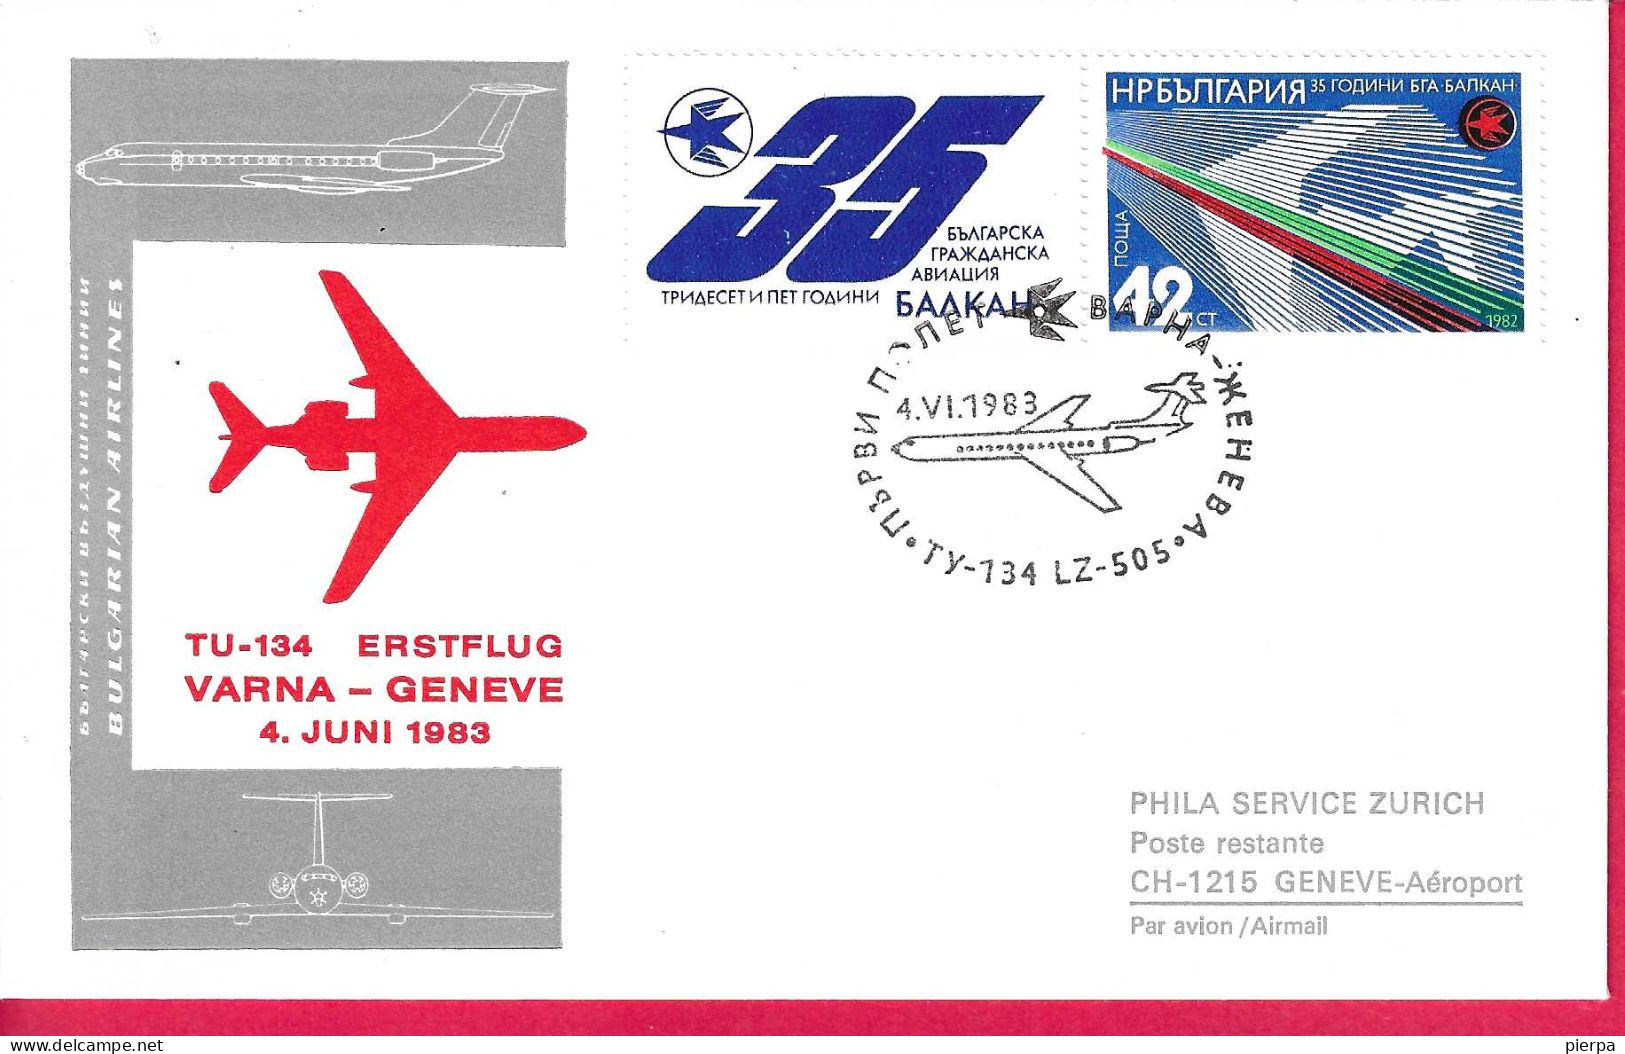 BULGARIA - FIRST FLIGHT TU-134 FROM VARNA TO GENEVE * 4.VI.1983* ON OFFICIAL COVER - Posta Aerea